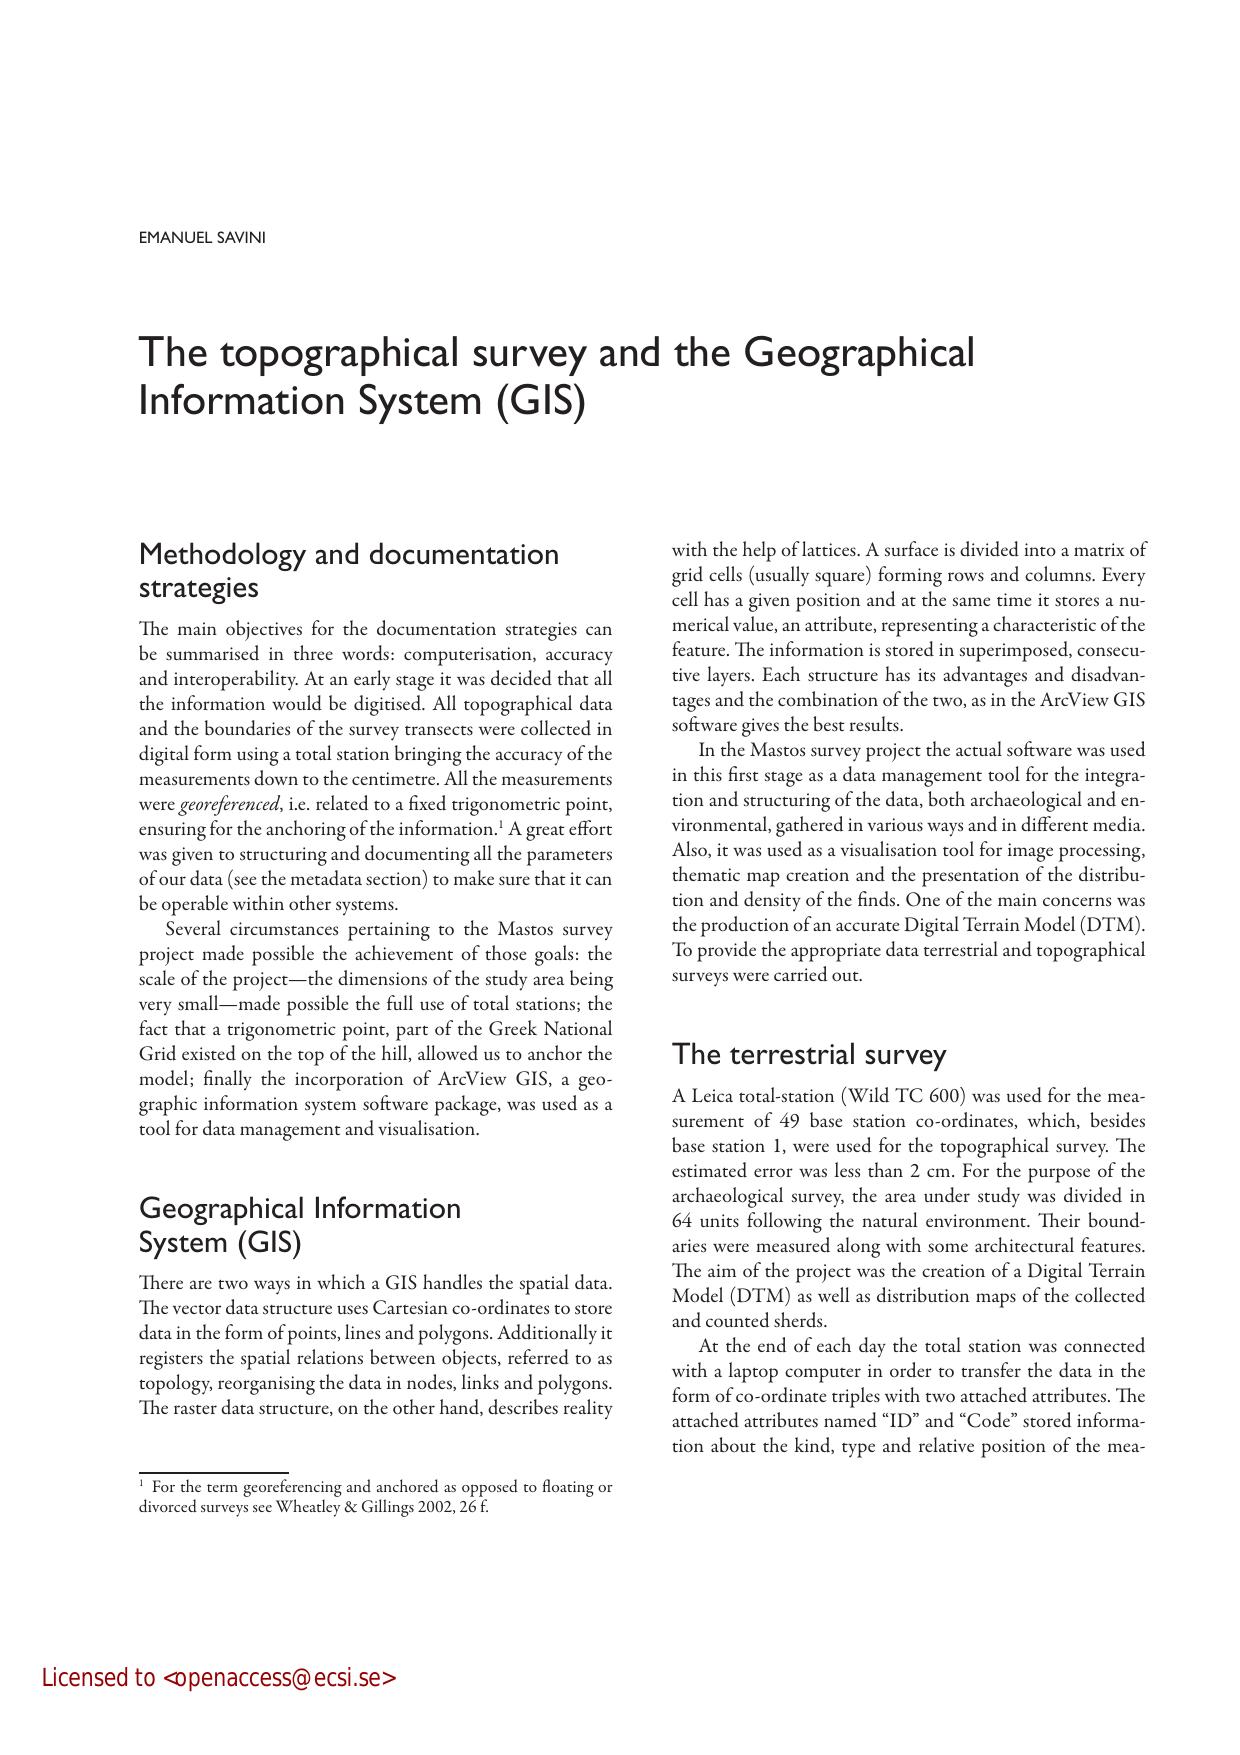 The topographical survey and the Geographical Information System (GIS)